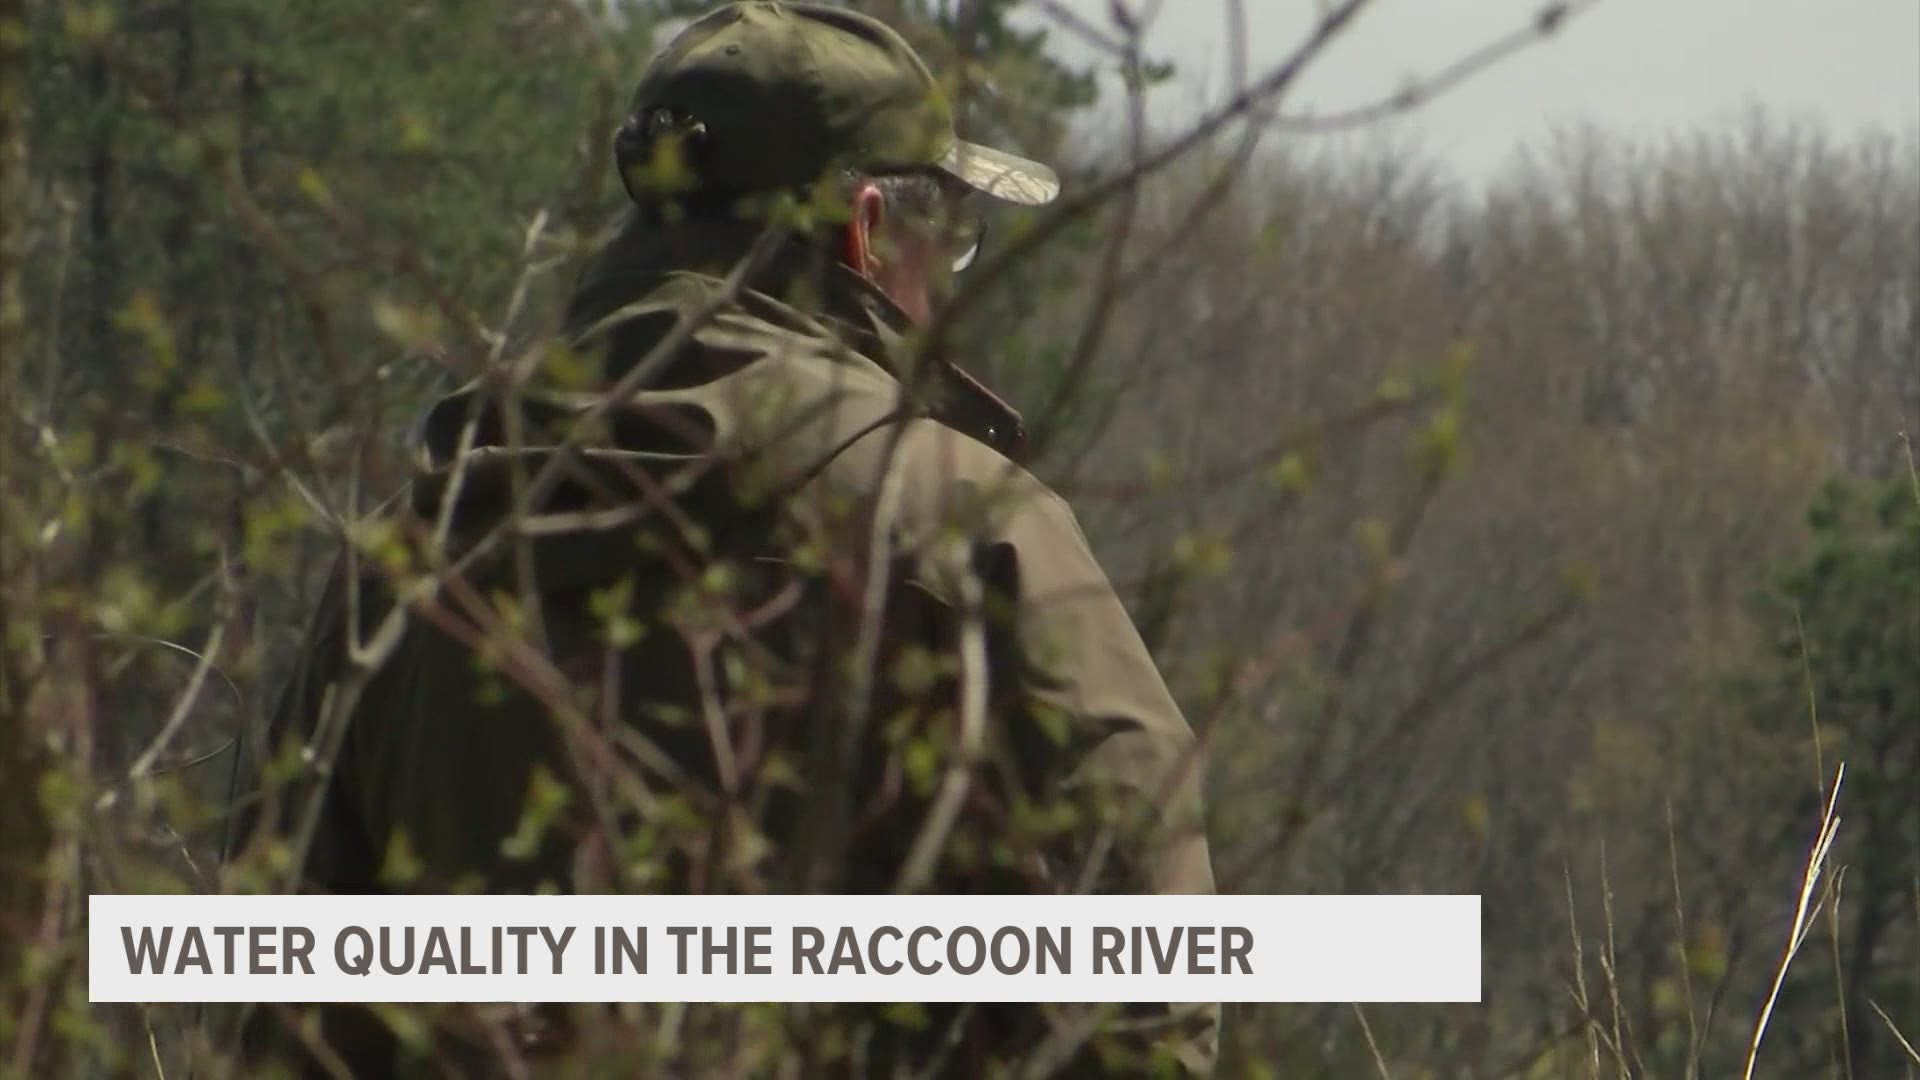 American Rivers, an organization that advocates for protecting the nation's waterways, called the Raccoon River one of America's most endangered river.